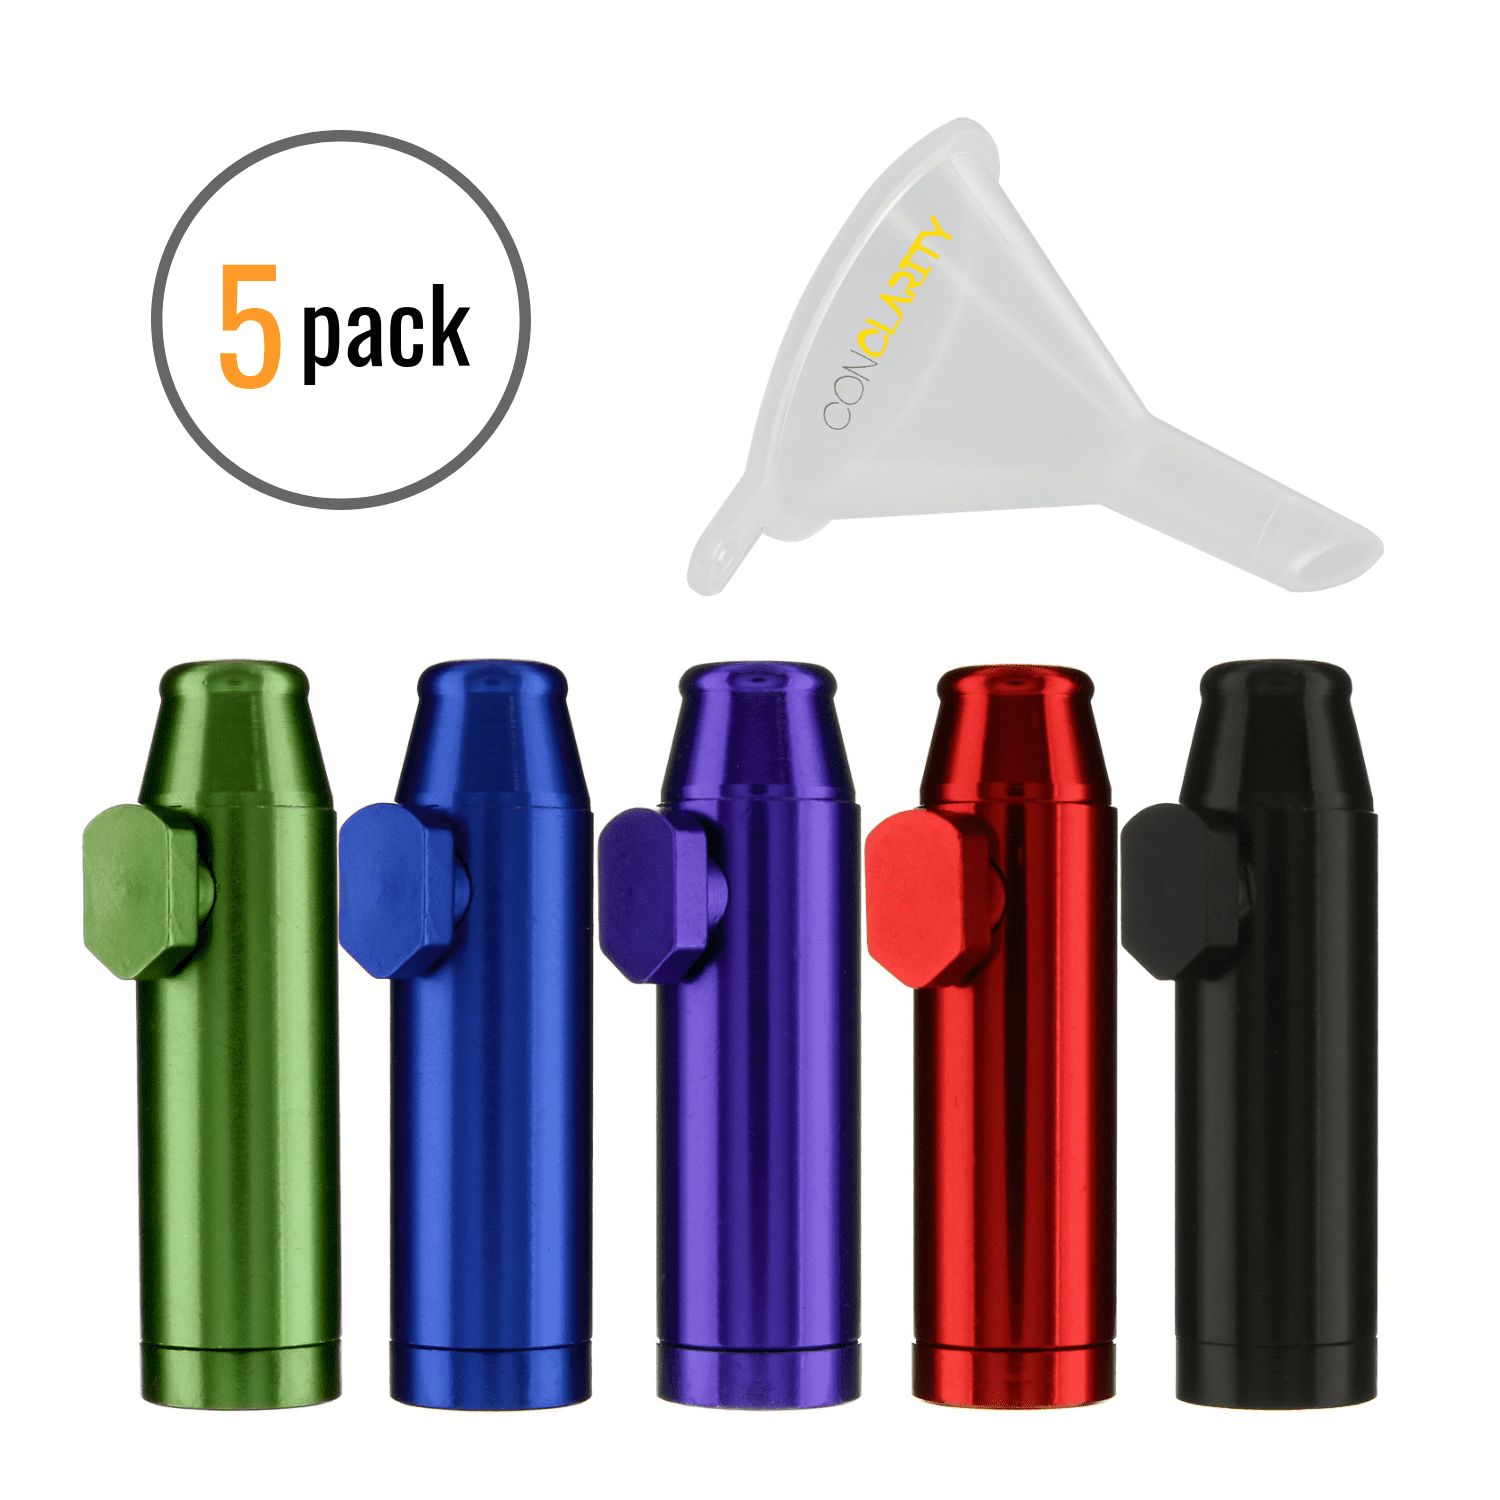 5 Pack Bundle with ConClarity Micro Funnel Premium 1g Spoon Black Snuff Bullet Spice Storage Glass and Acrylic 